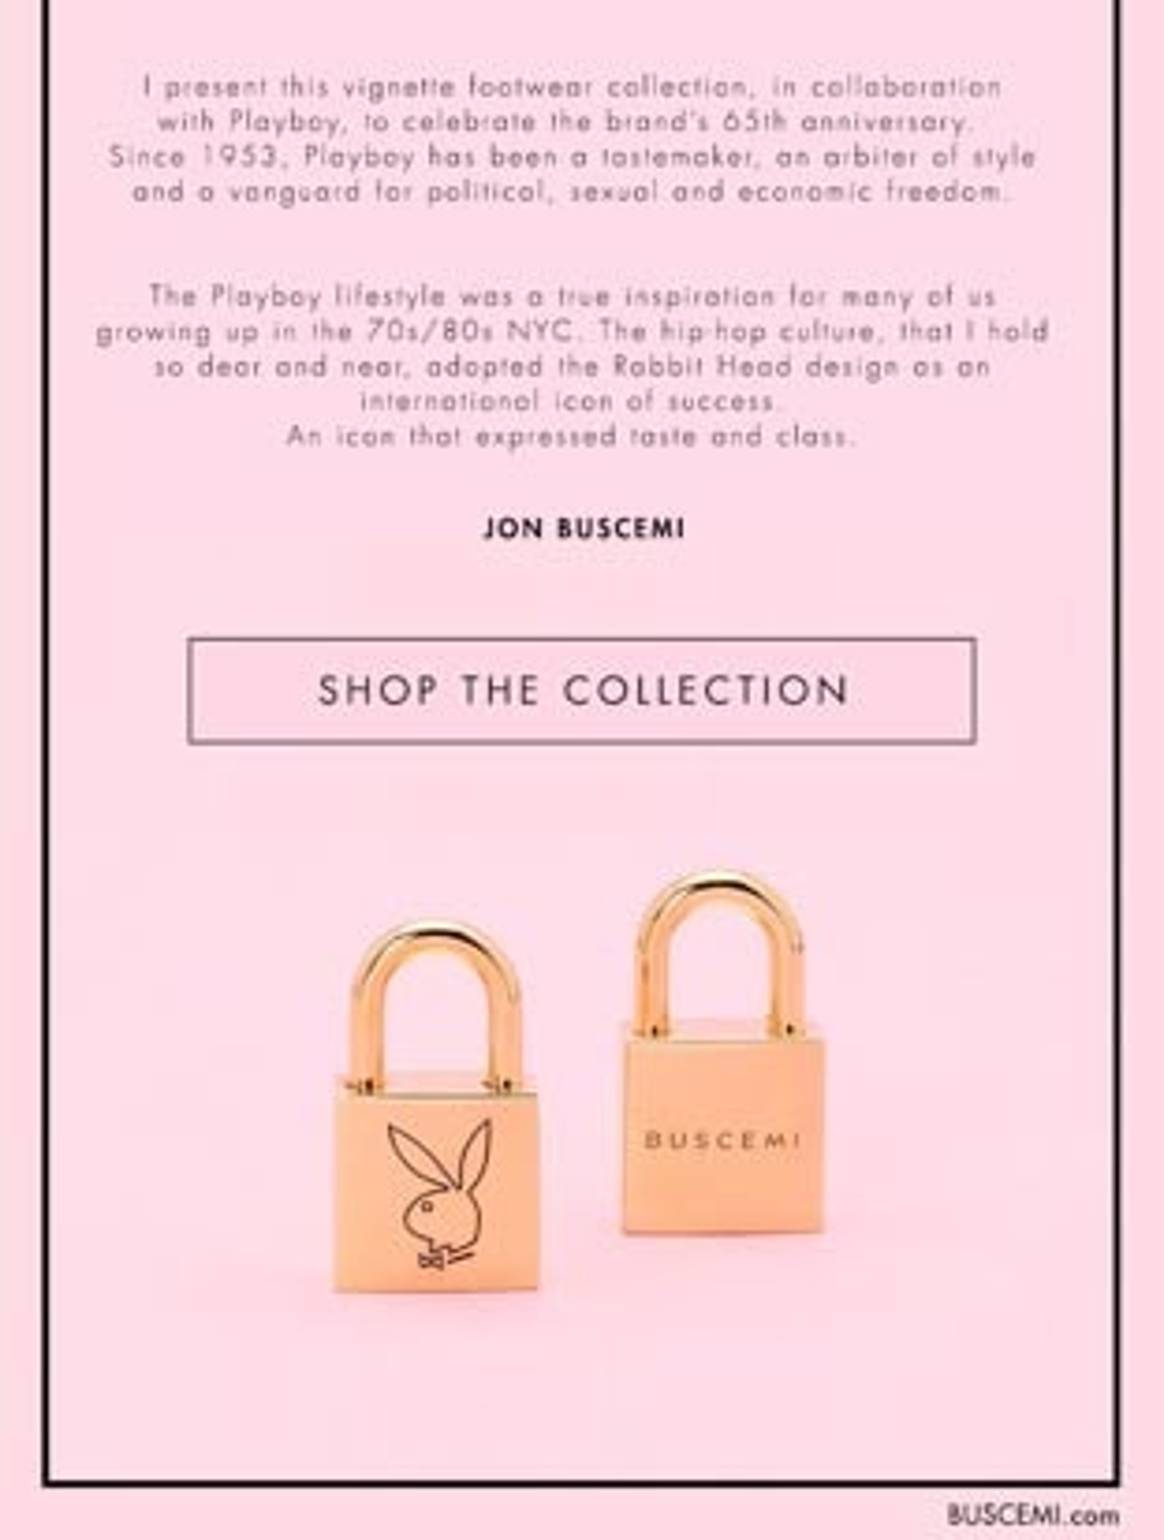 Playboy X BUSCEMI Collab Launch and More!